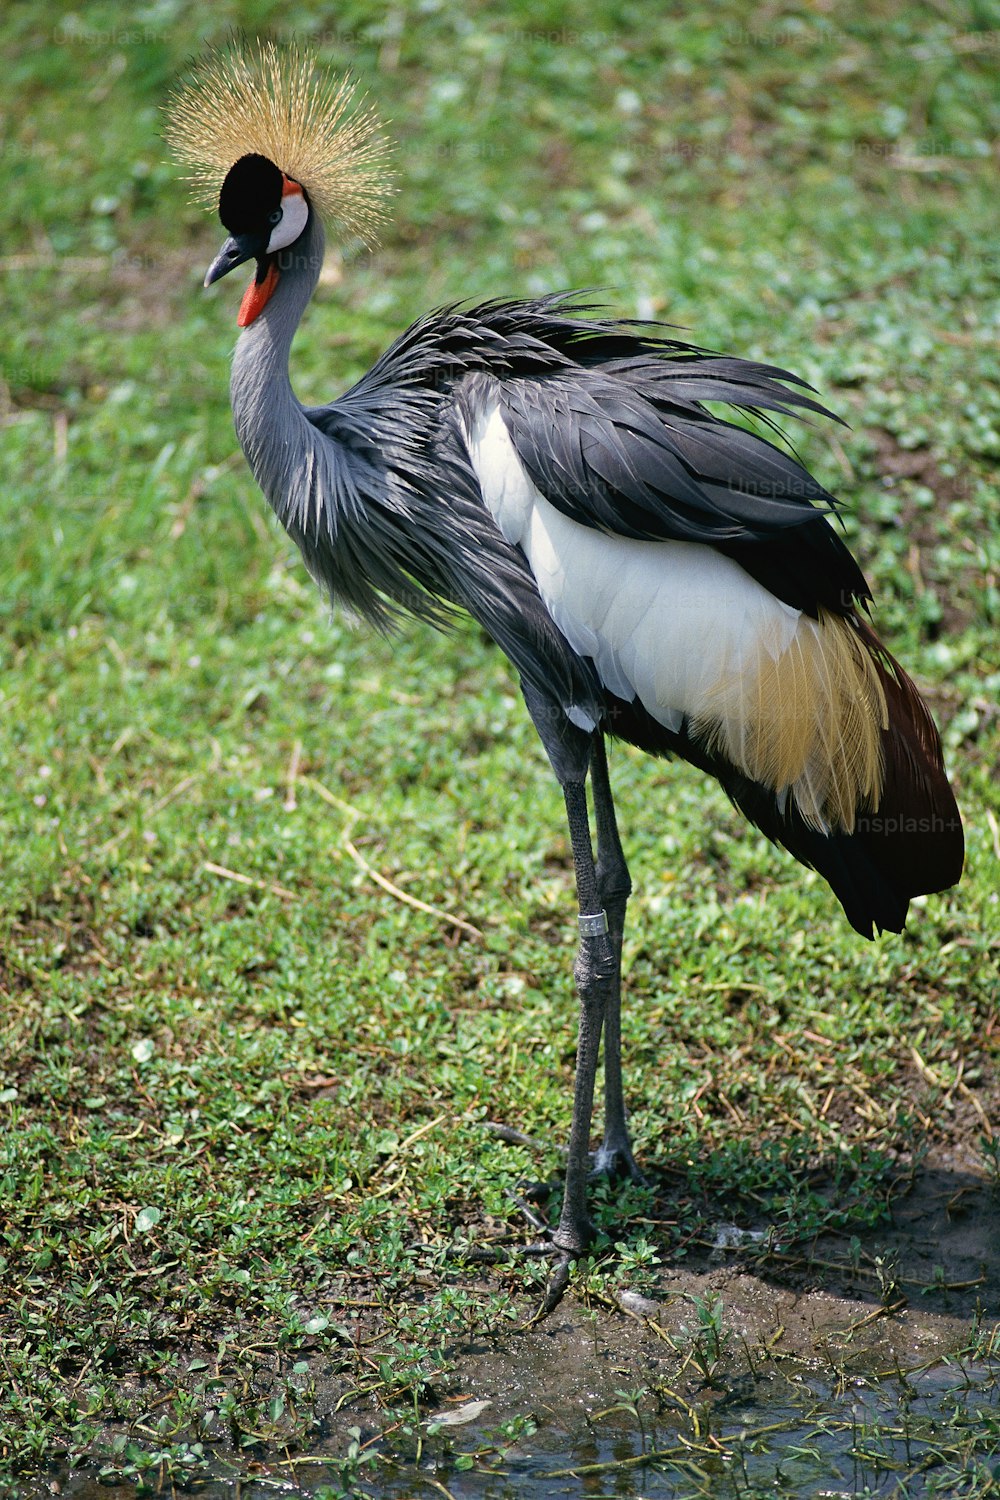 a large bird with a long neck standing in the grass